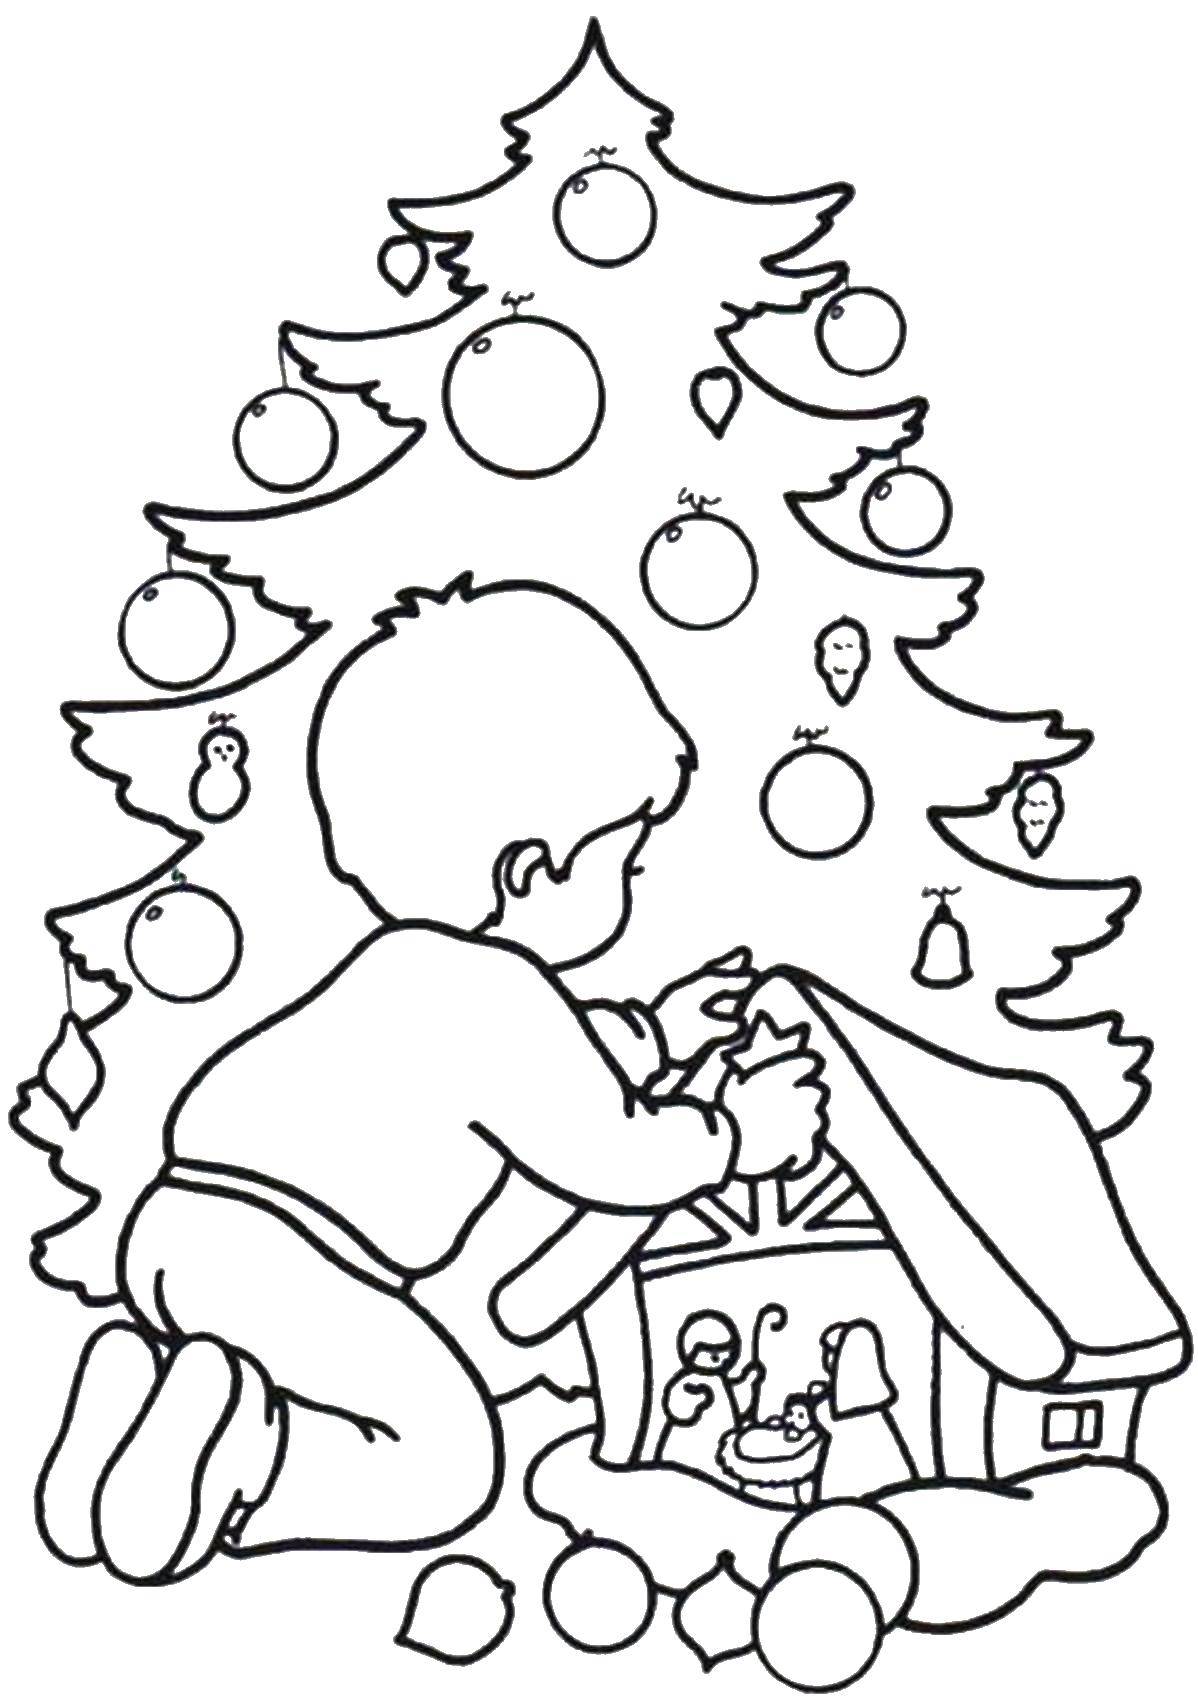 Coloring Decoration for Christmas. Category Christmas. Tags:  Christmas, Christmas toy, Christmas tree, gifts.